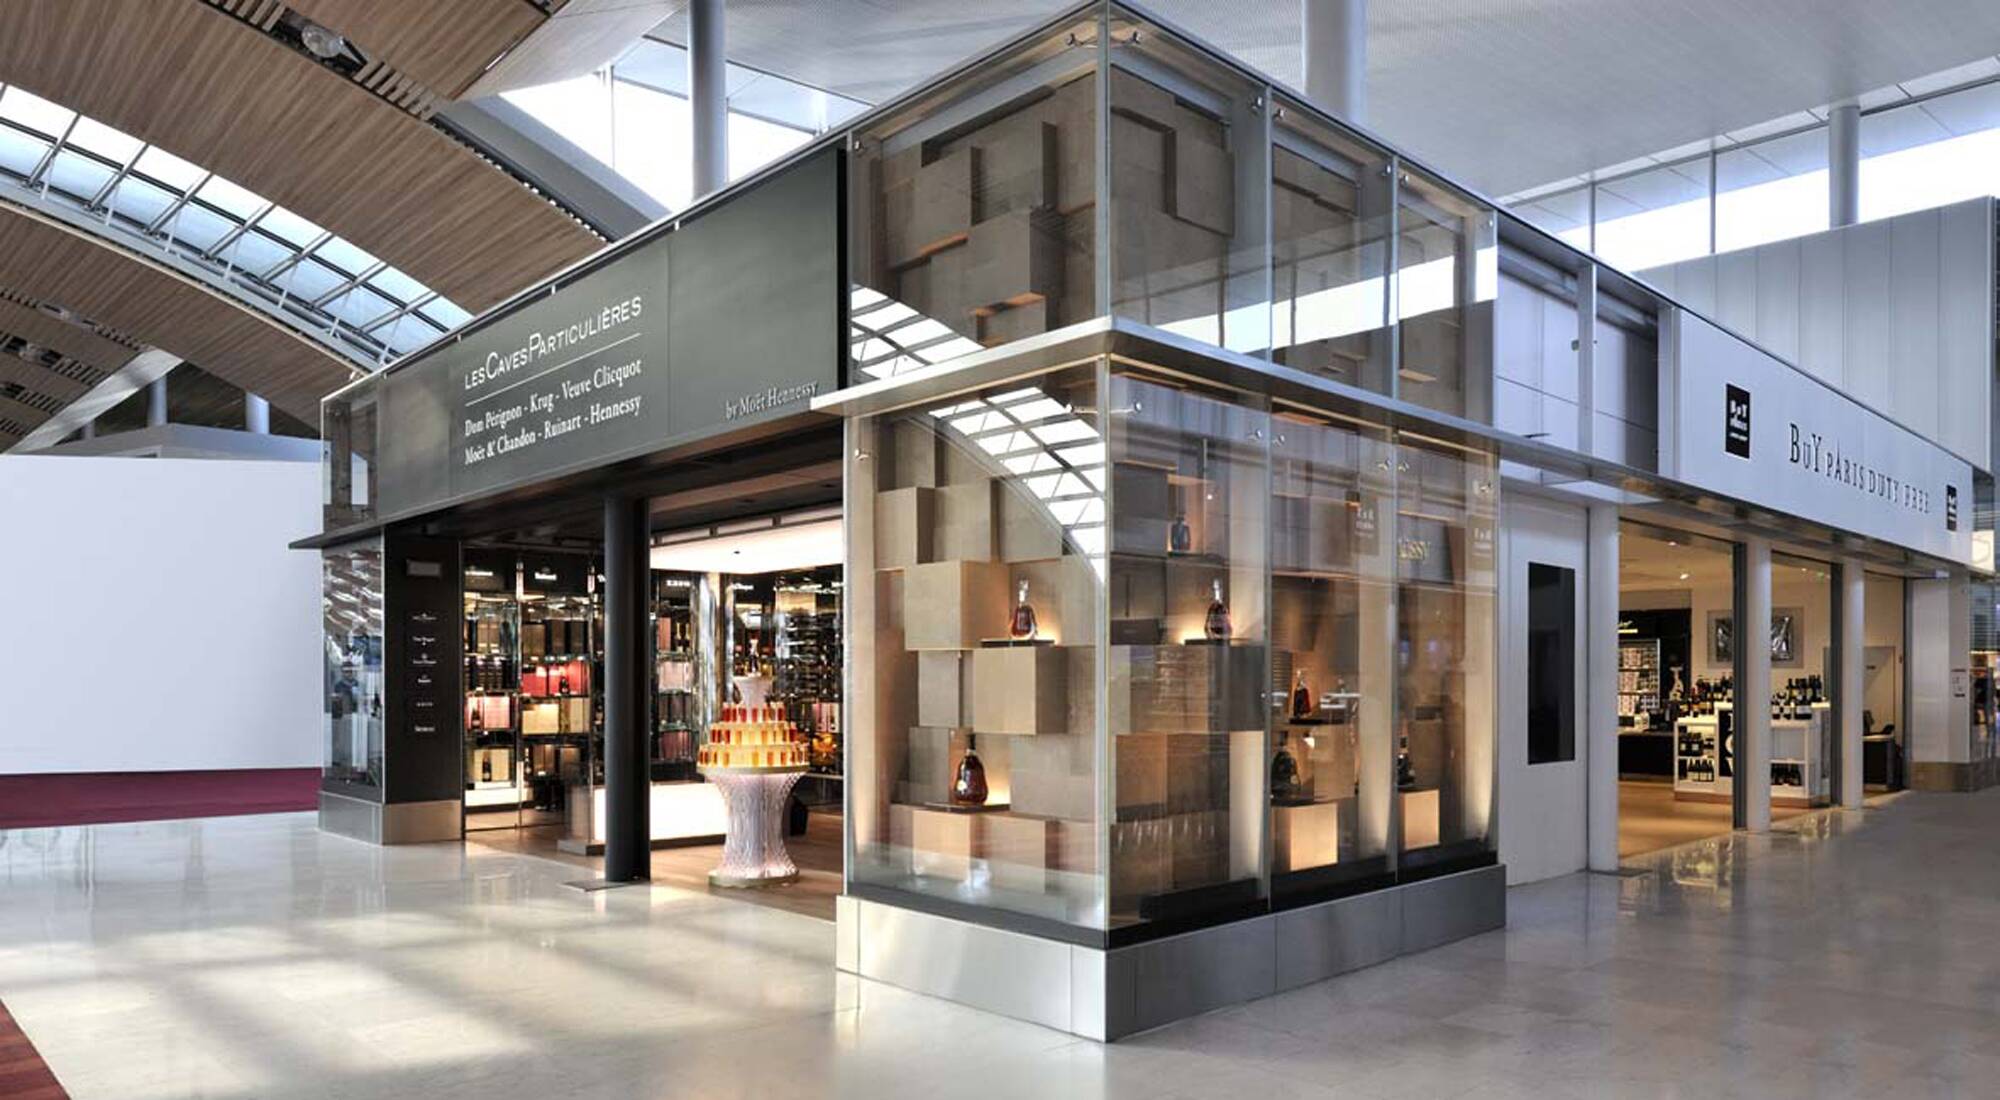 Hennessy opens first dedicated travel retail store at Paris CDG